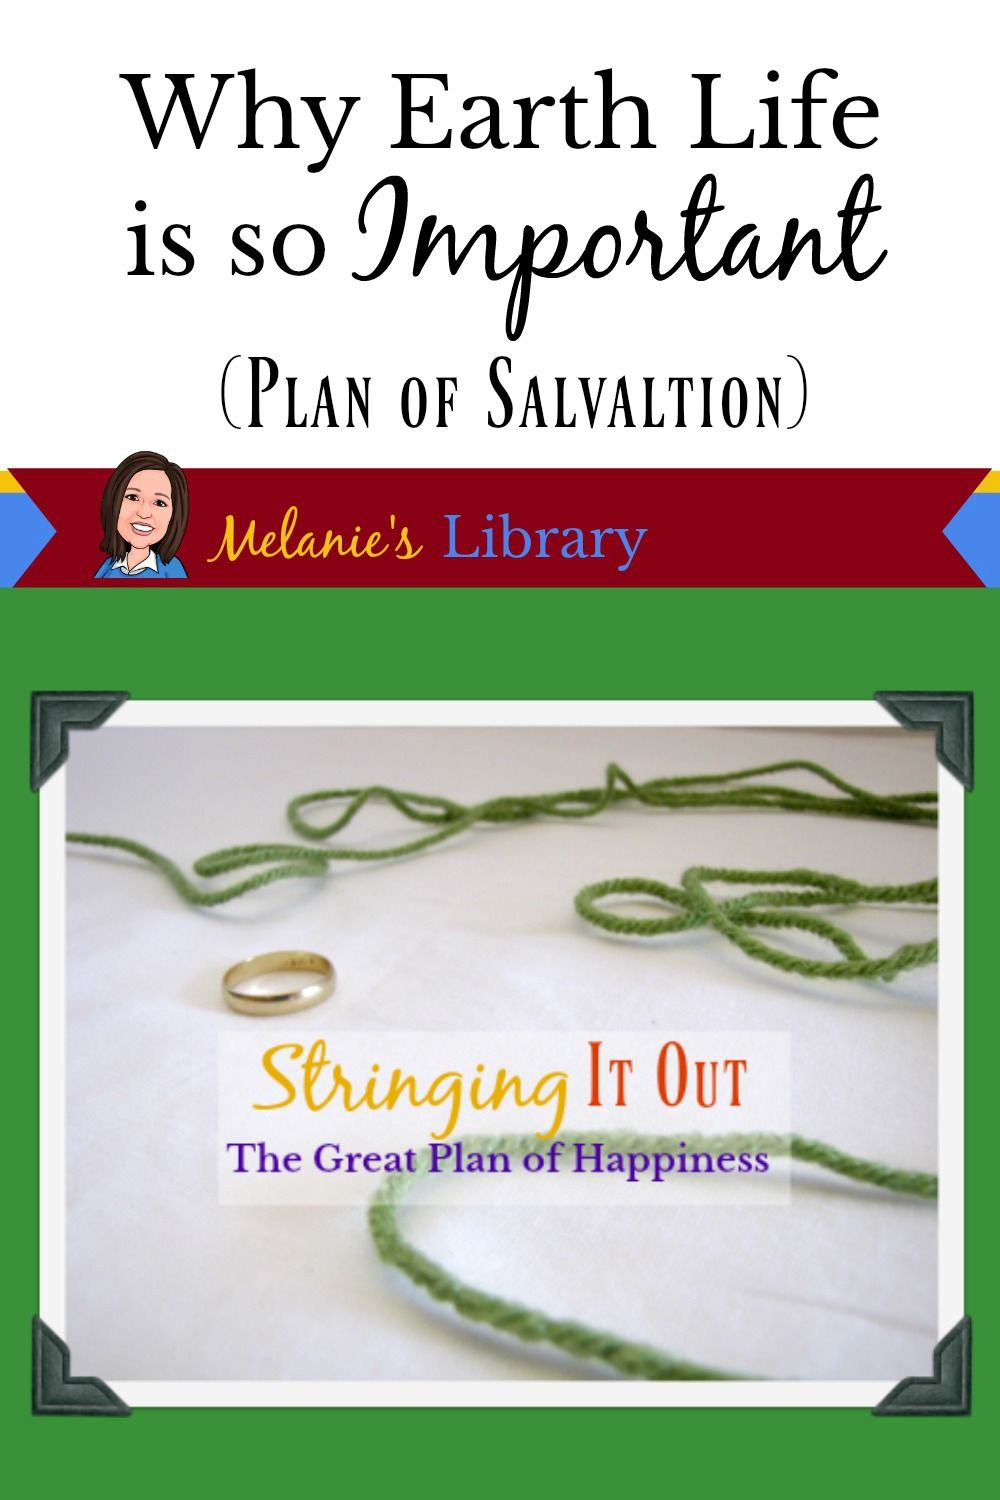 The Great Plan Of Happiness - Object Lesson | Object Lessons